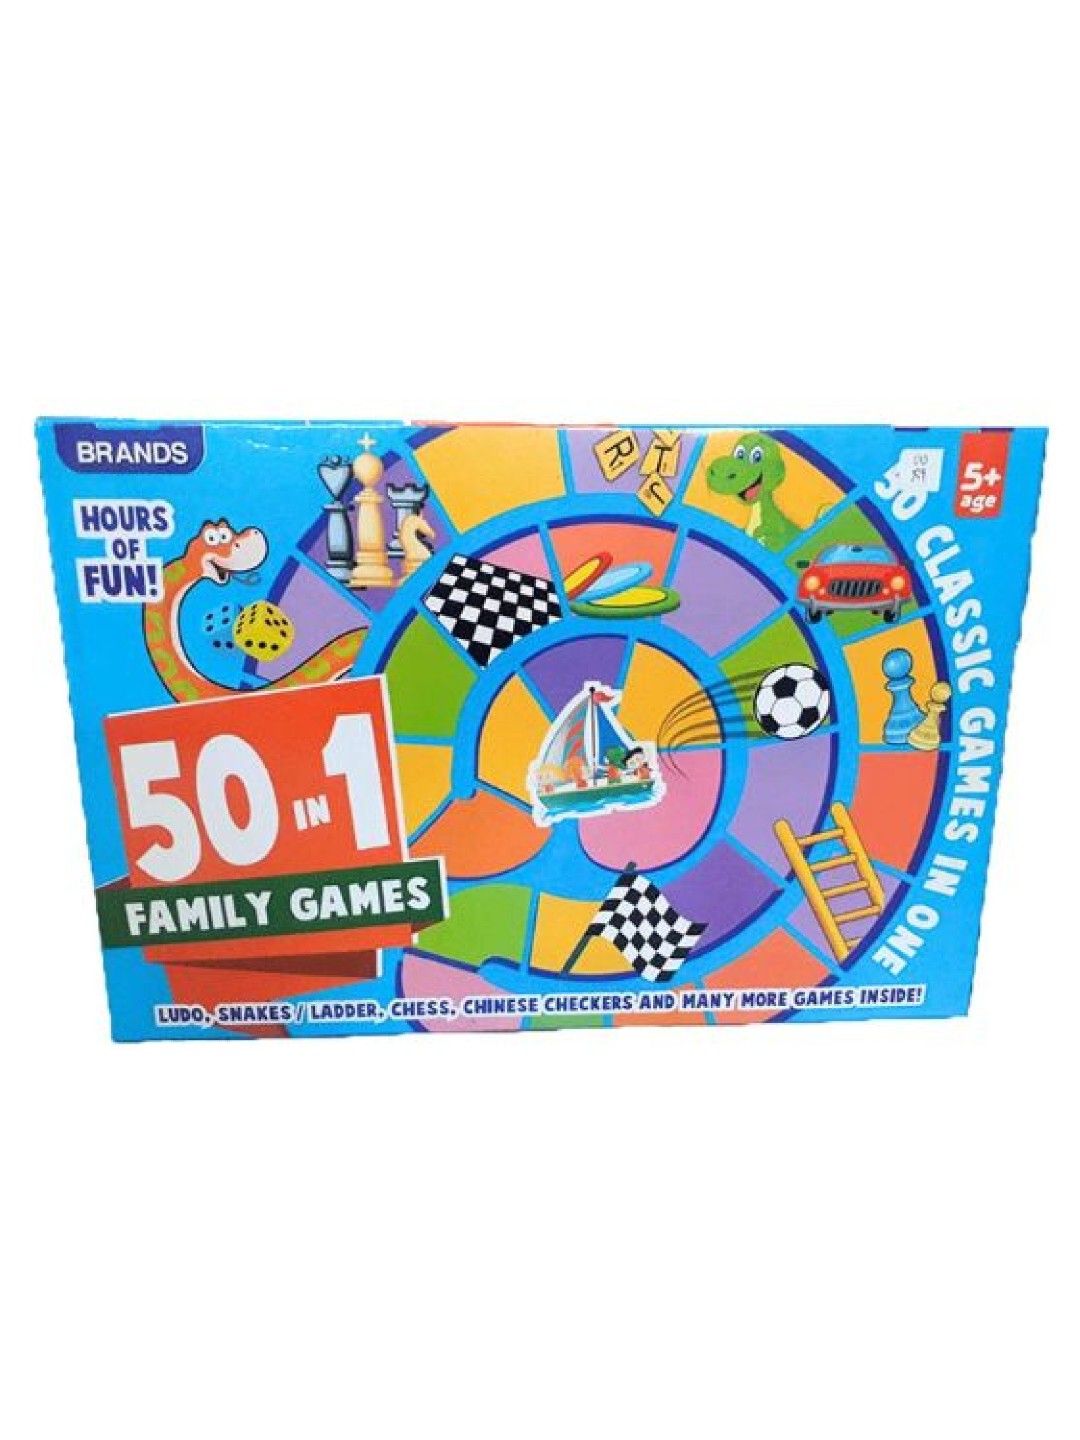 Playcraft 50 in 1 Family Games